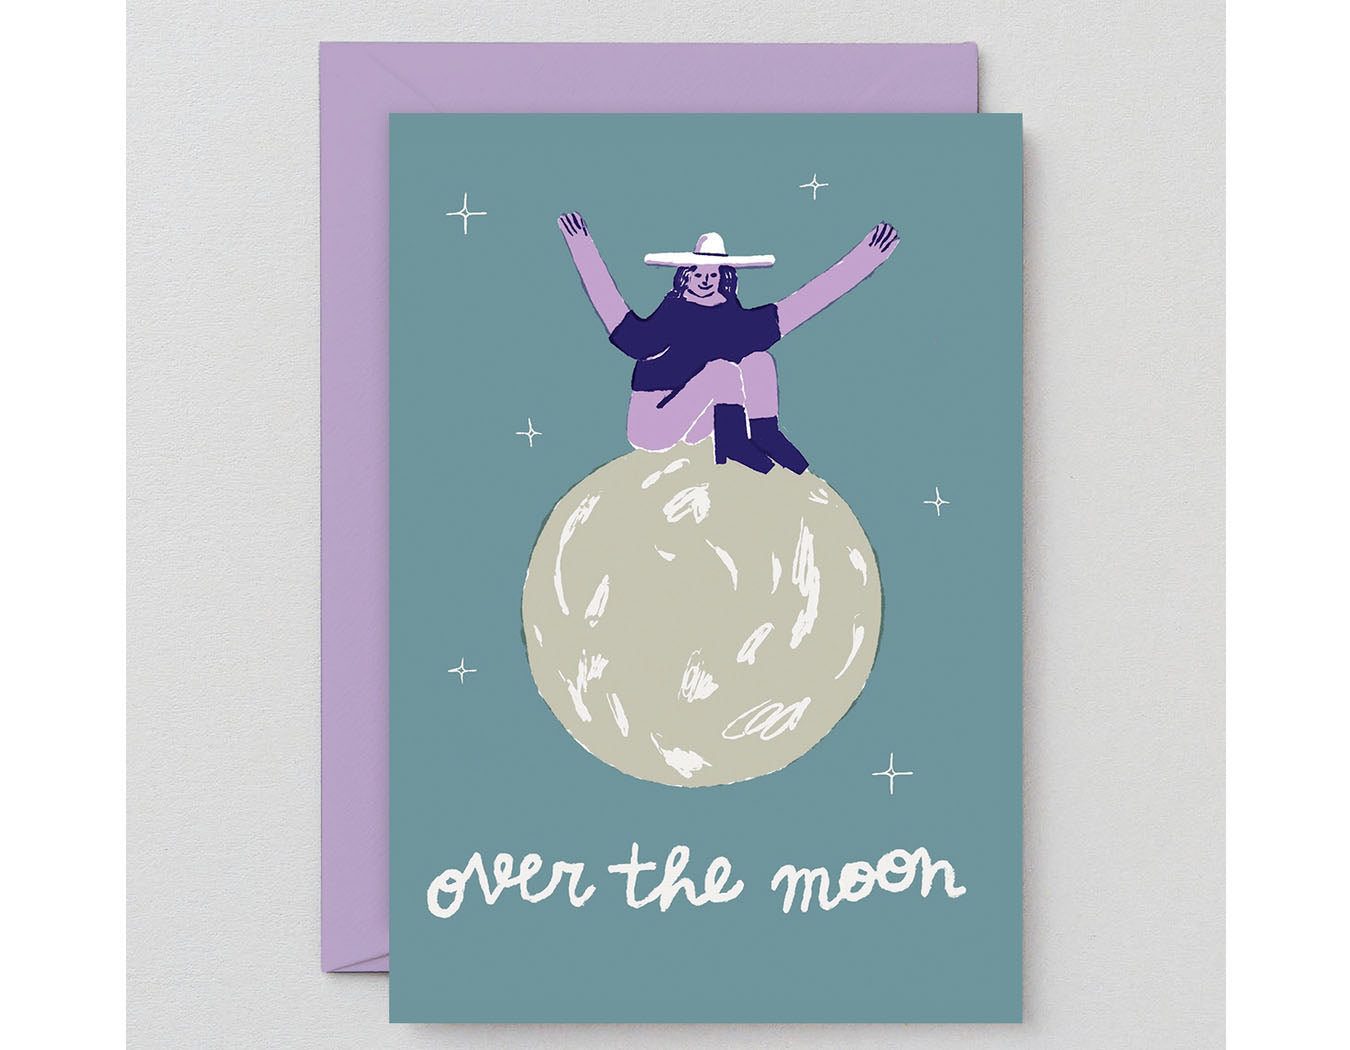 teal background illustrated woman in hat sitting on moon text reads over the moon